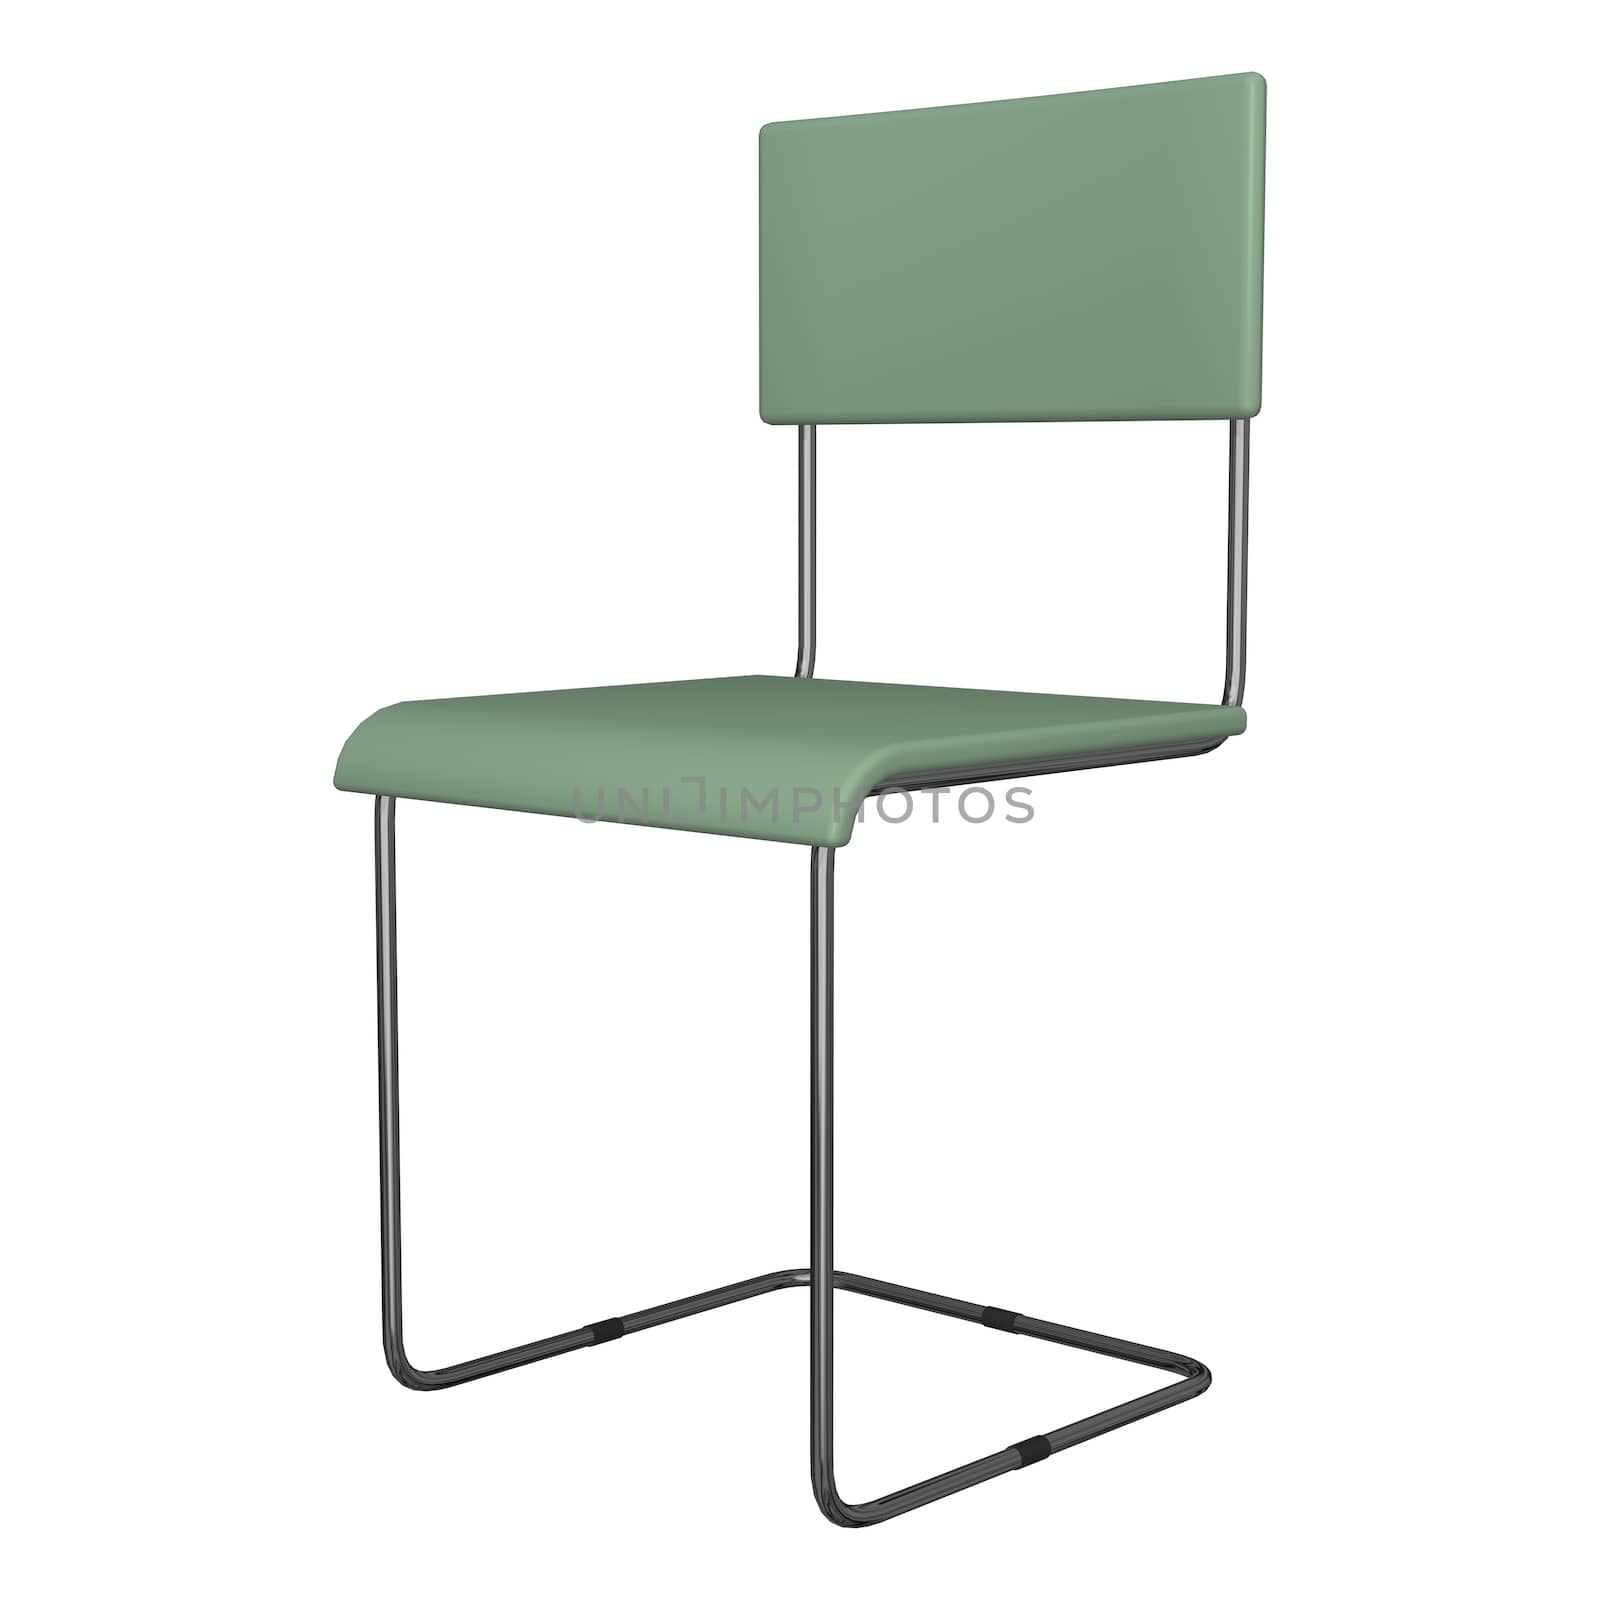 3D digital render of a school chair isolated on white background